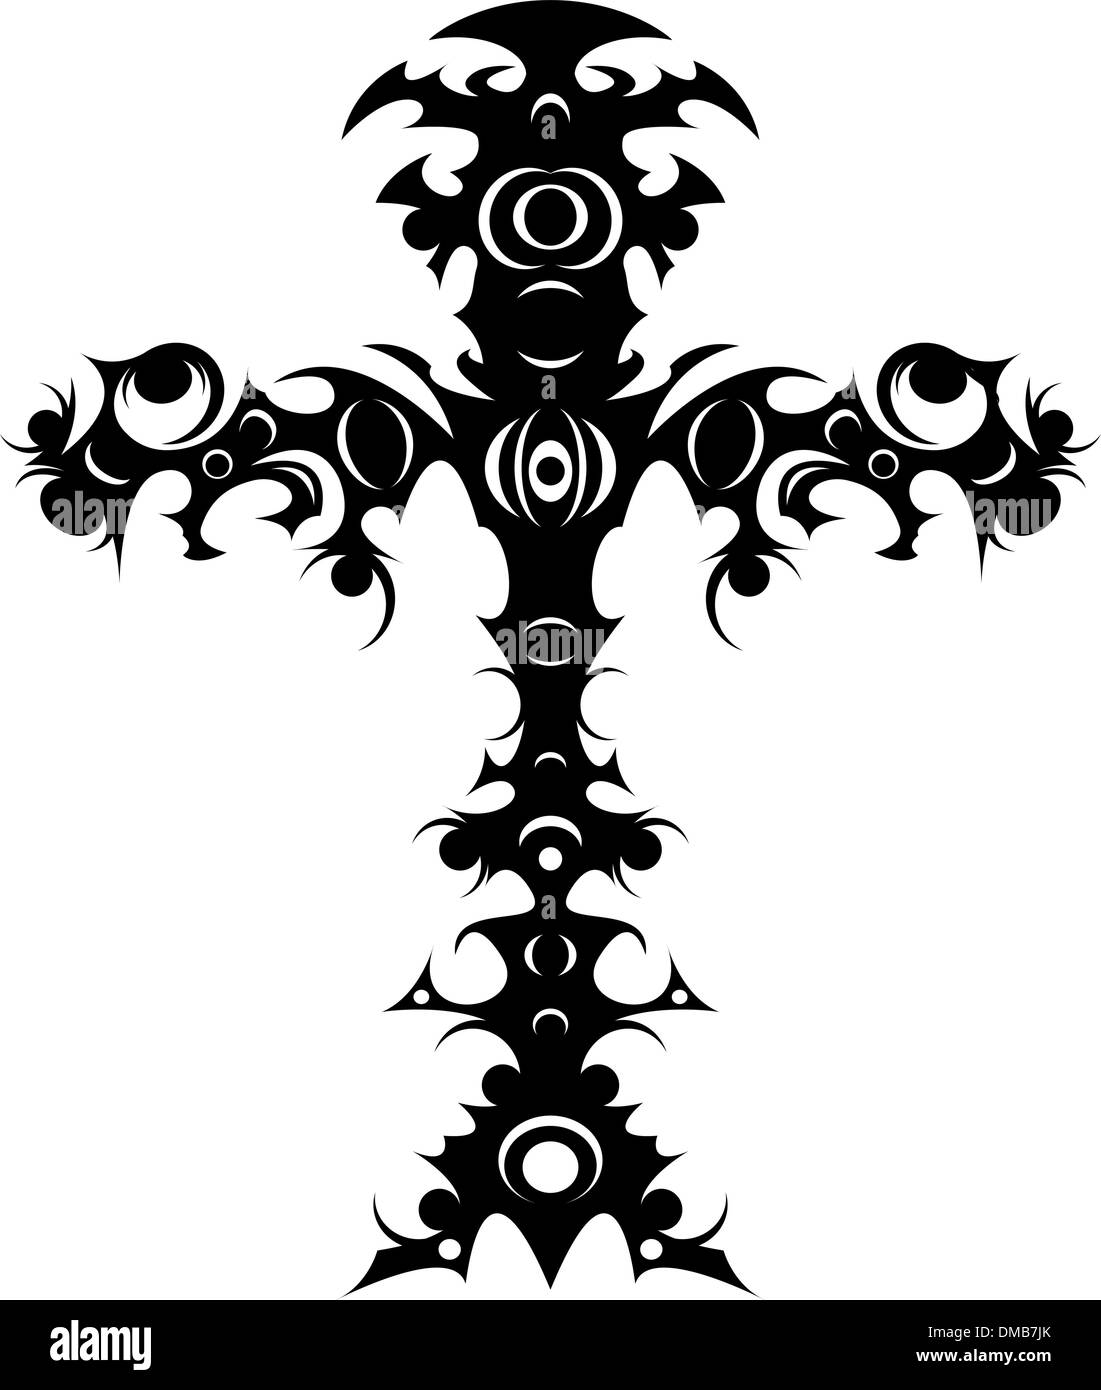 7,677 Celtic Cross Tattoo Royalty-Free Photos and Stock Images |  Shutterstock